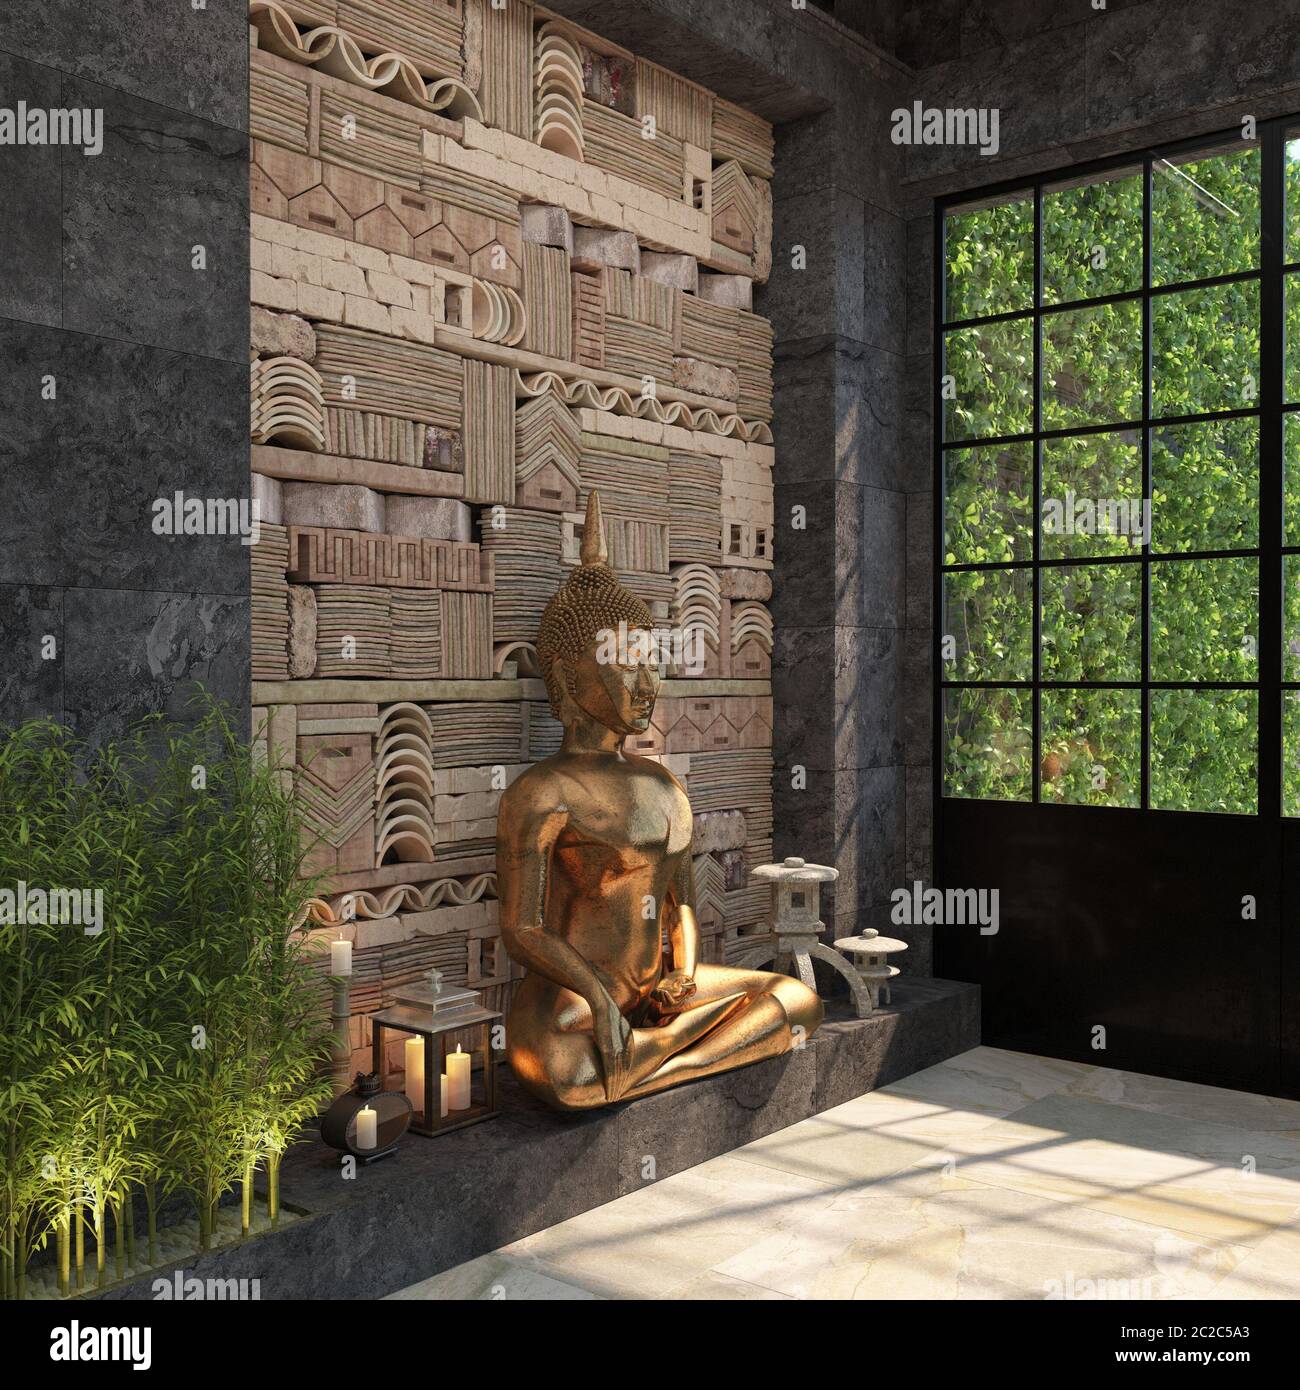 Home decor with a gold statue of Buddha against a black wall with ...